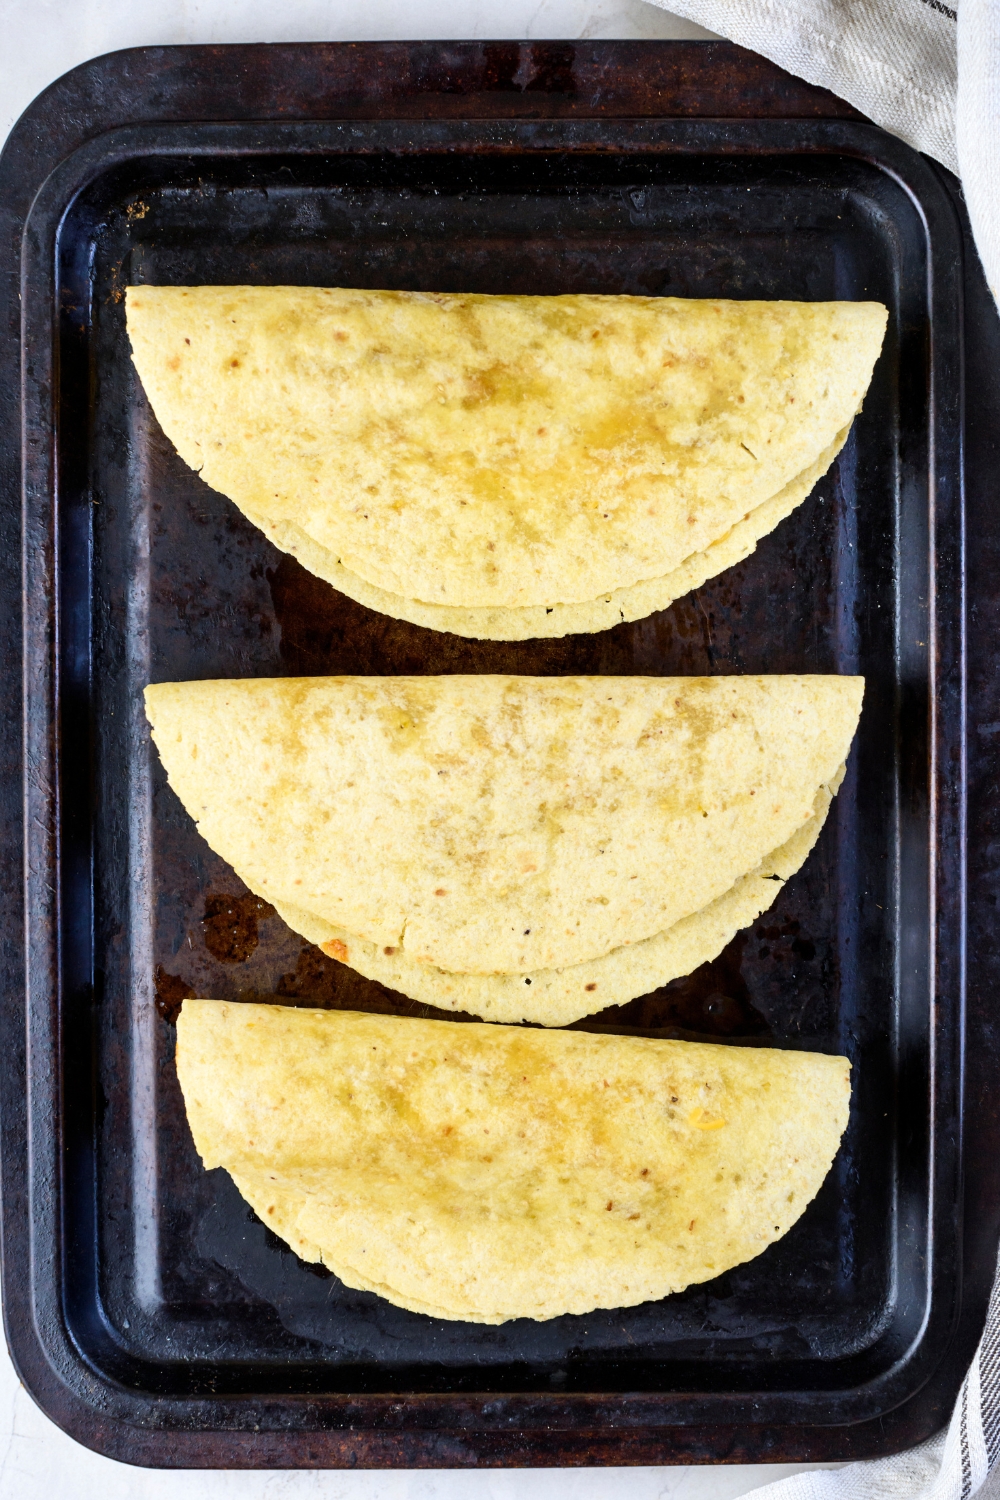 A baking sheet with three tortillas that have been baked and shaped into taco shells.